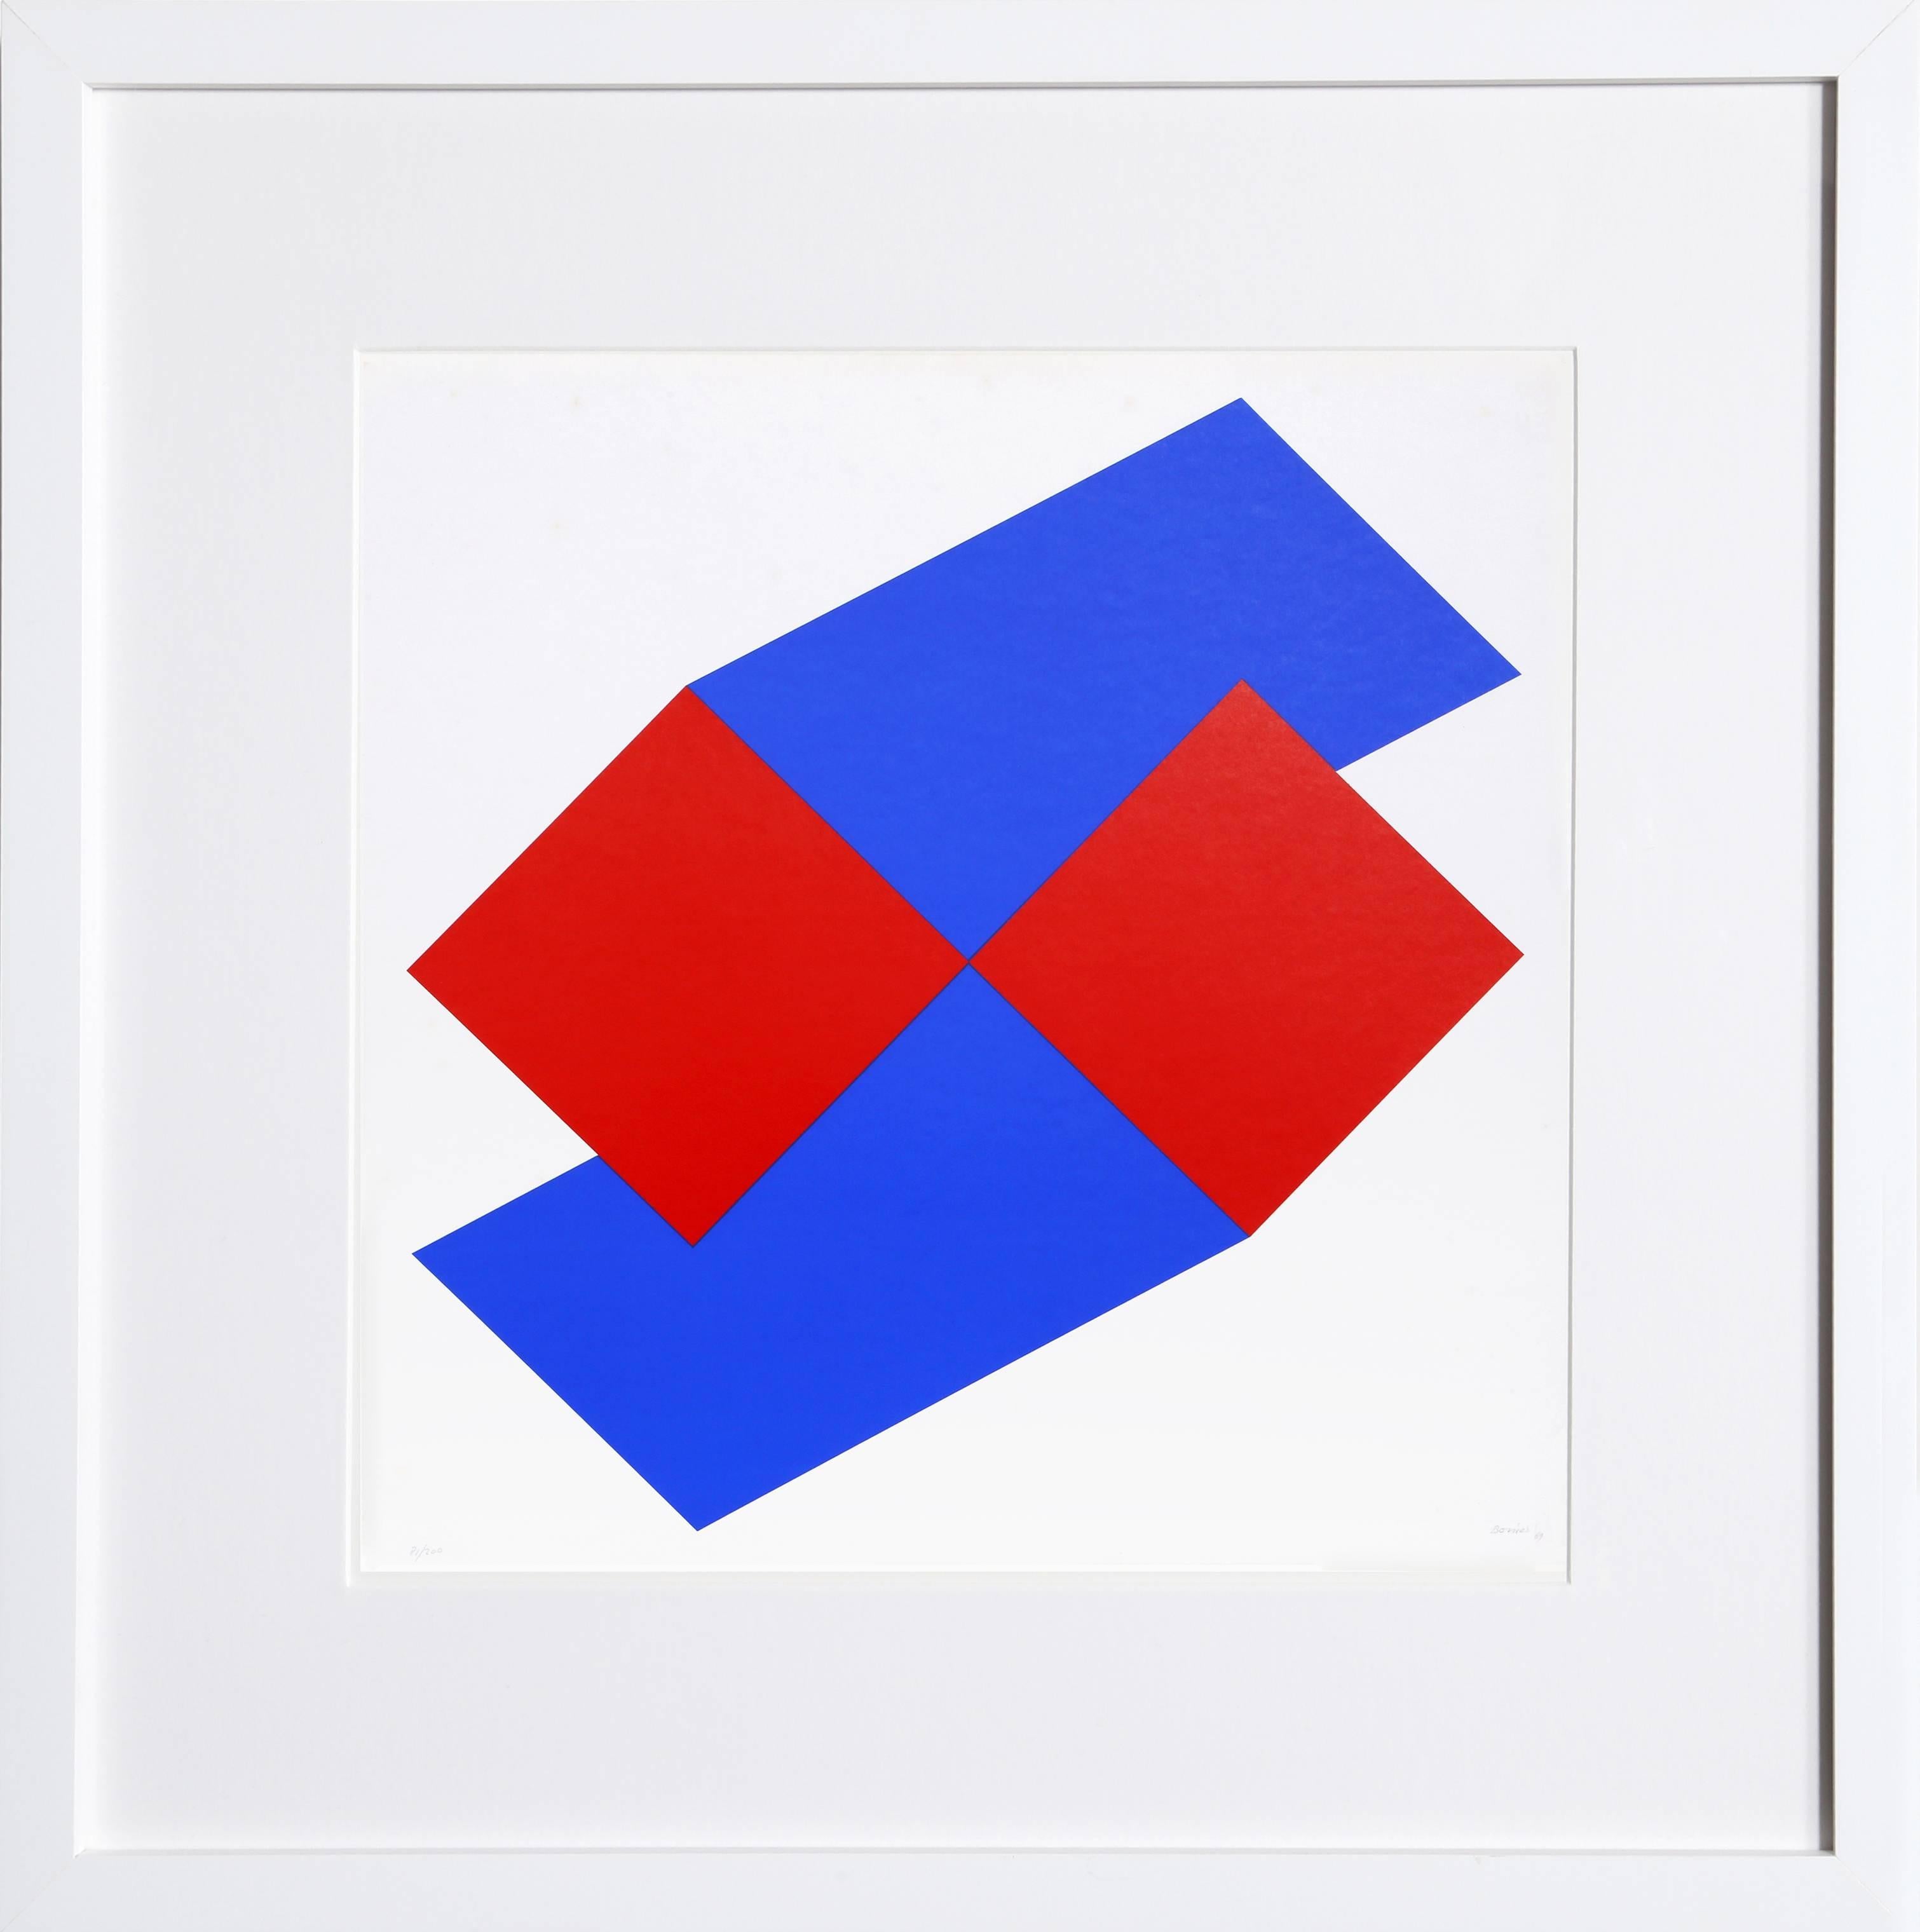 Bob Bonies Abstract Print - Untitled - Composition in Blue and Red II